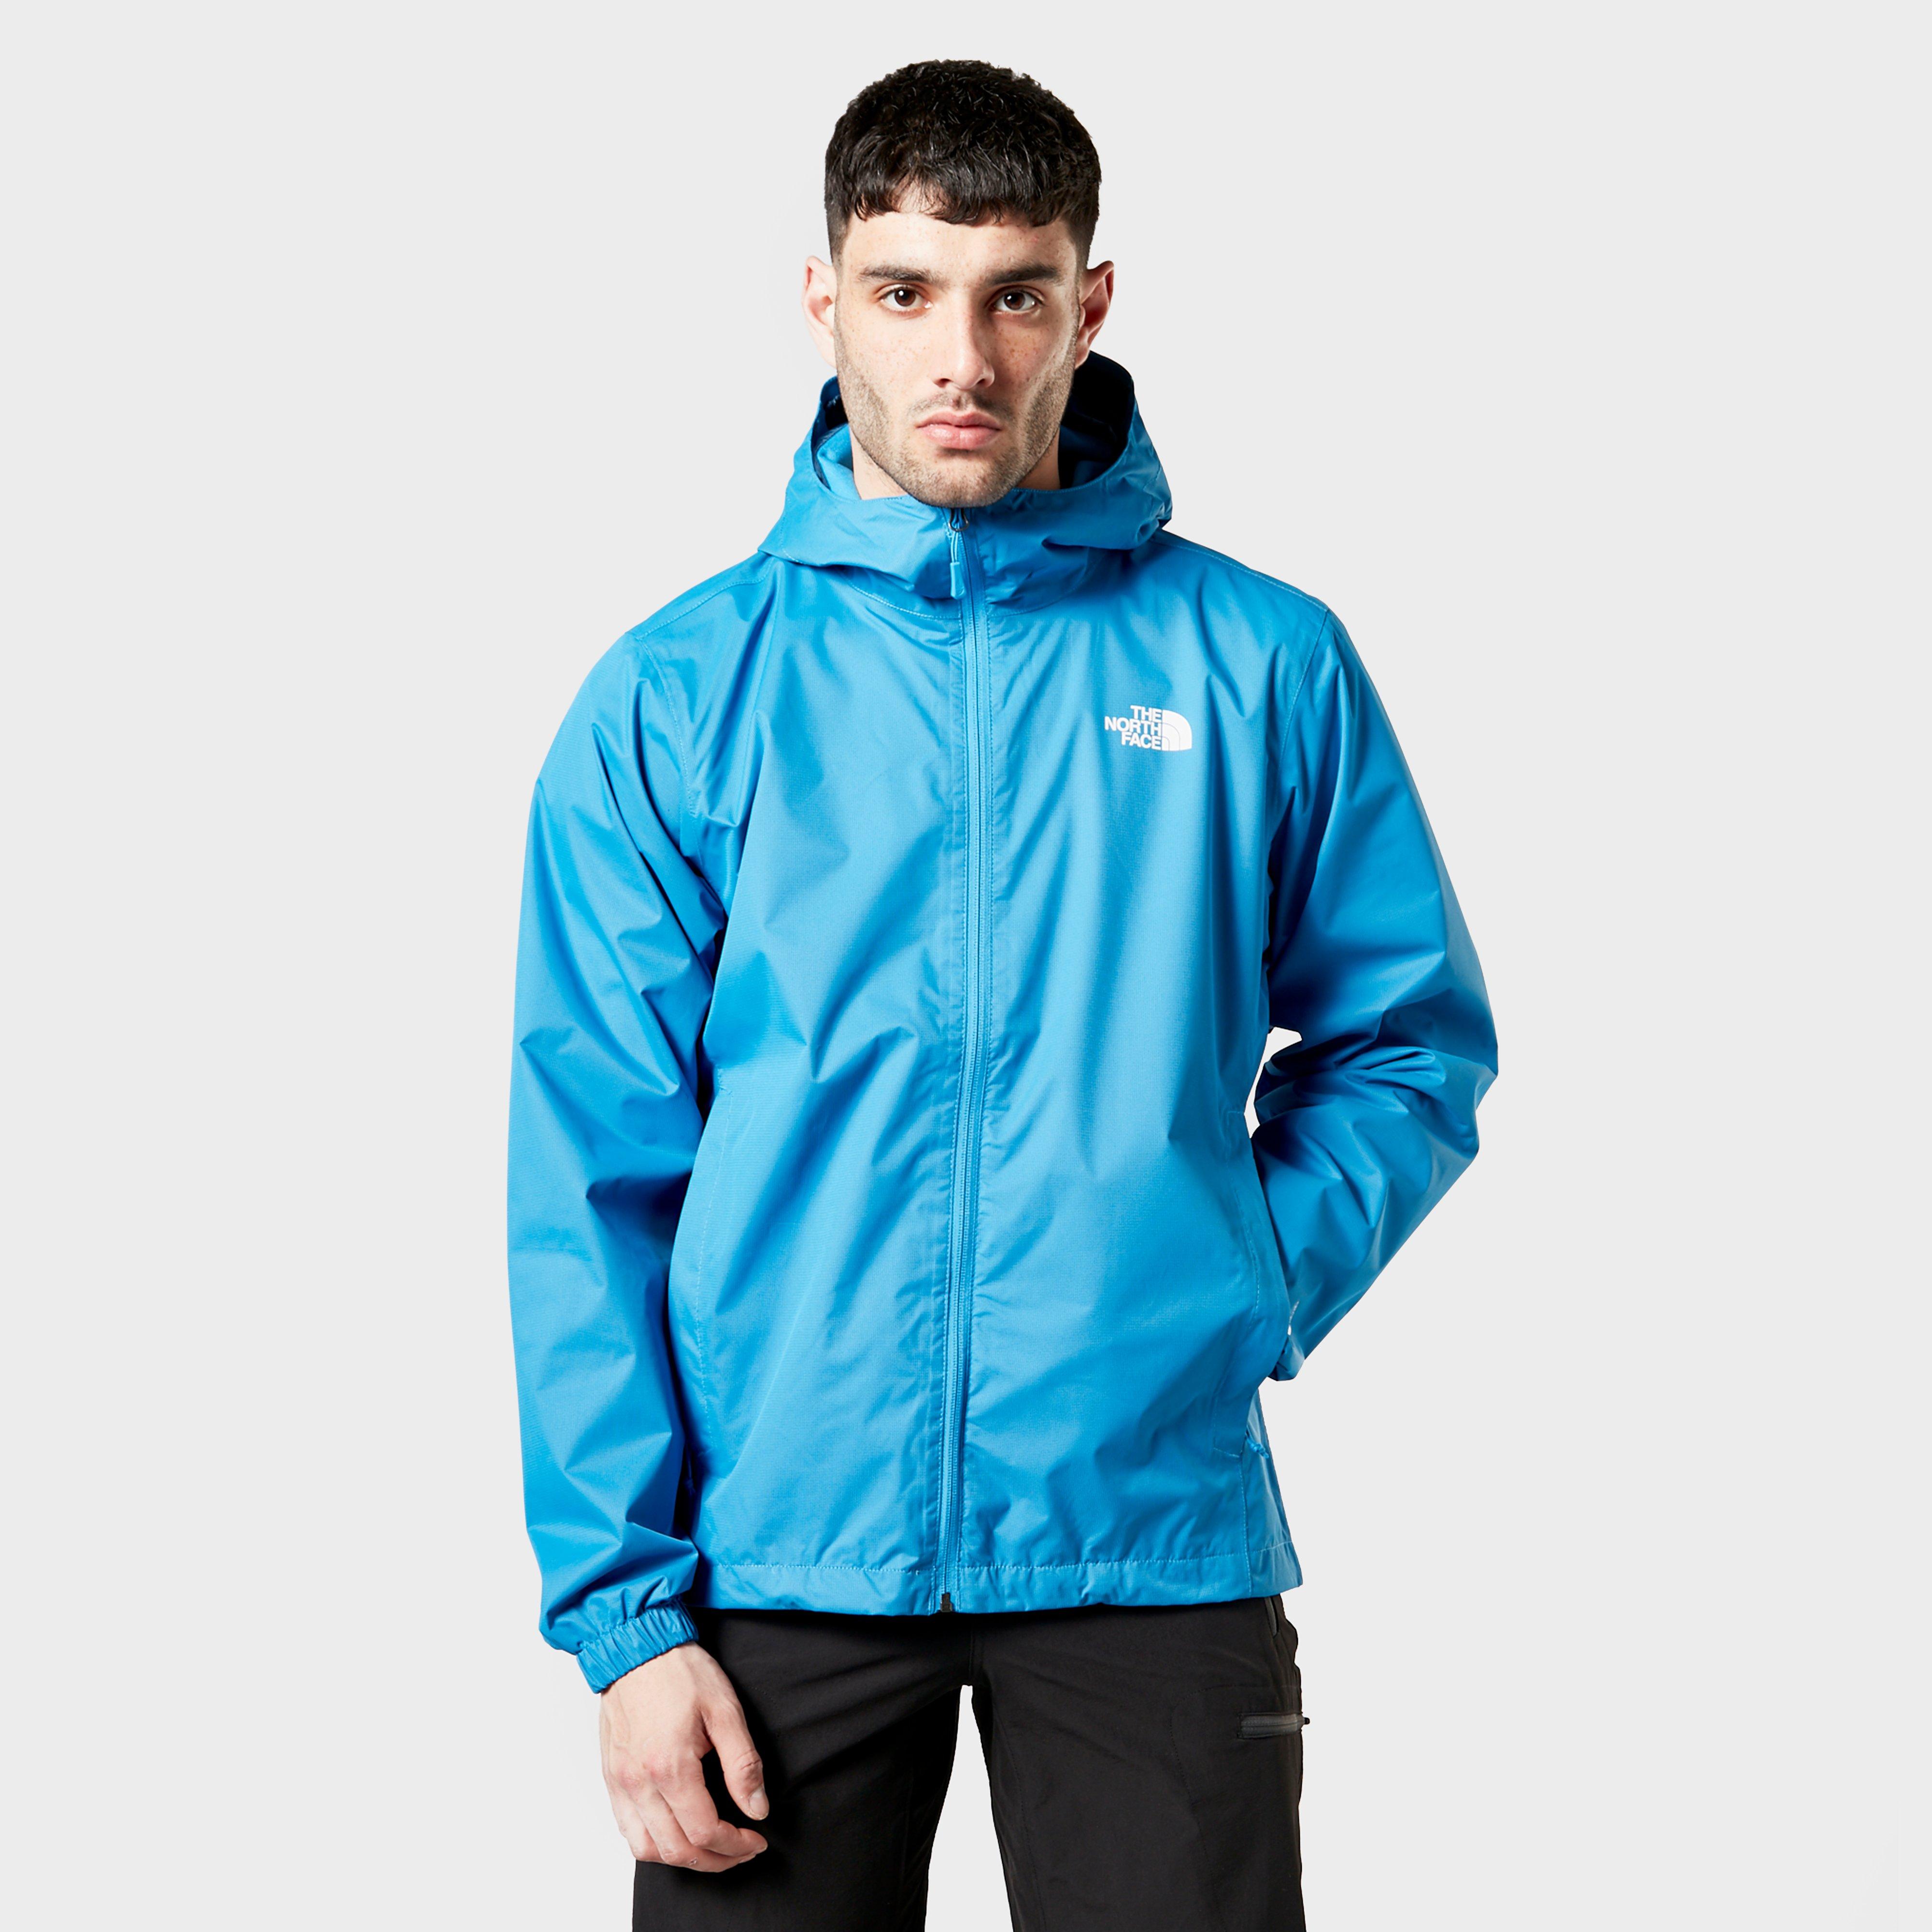 the north face quest jacket mens